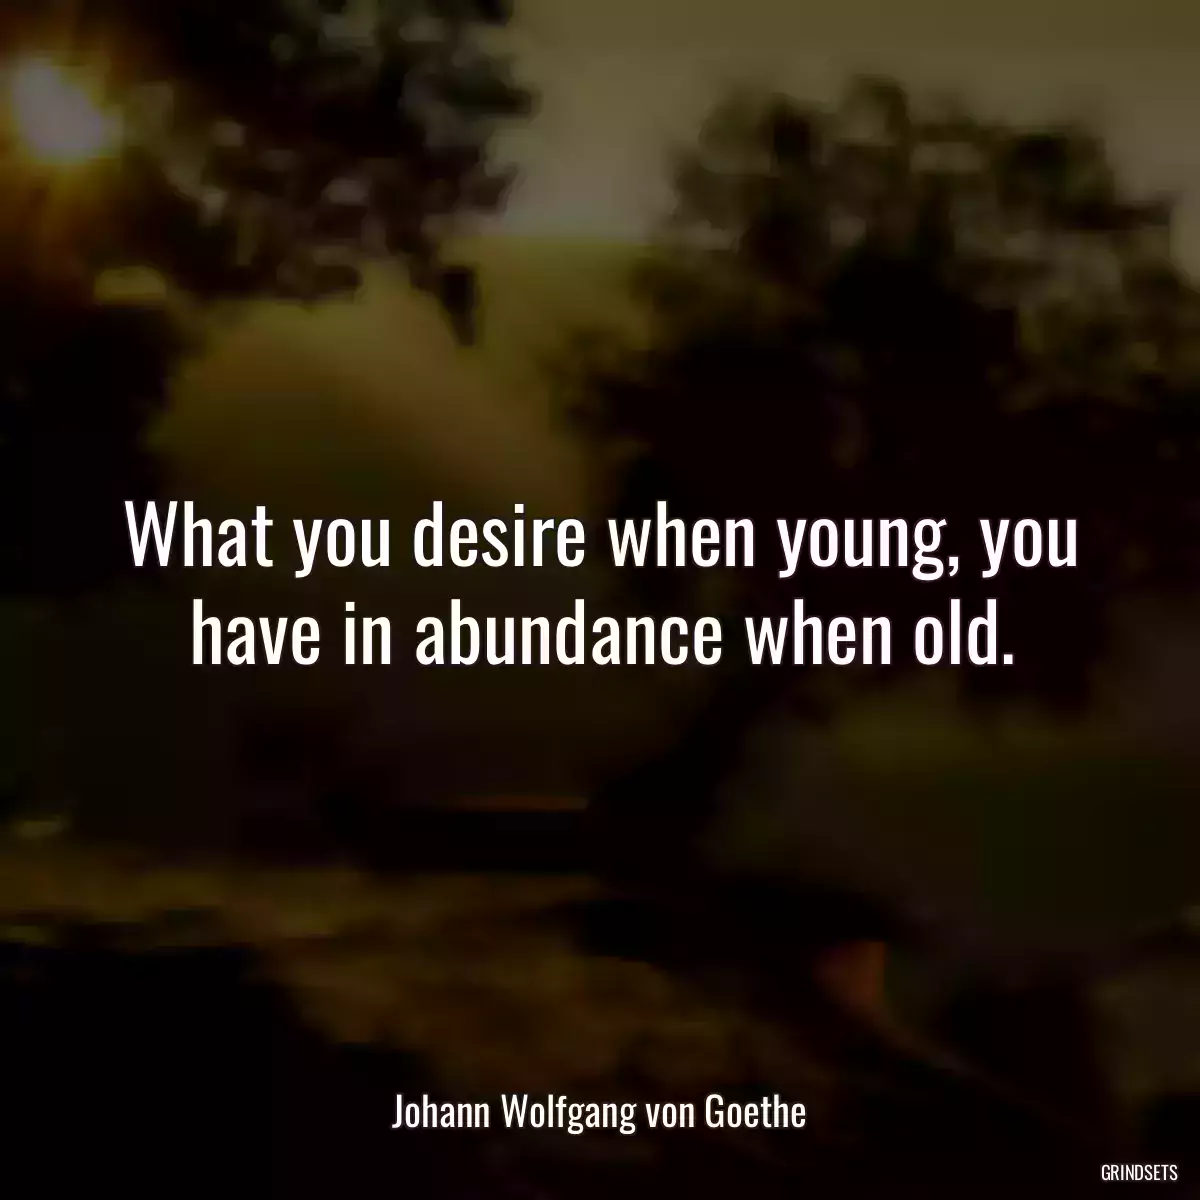 What you desire when young, you have in abundance when old.